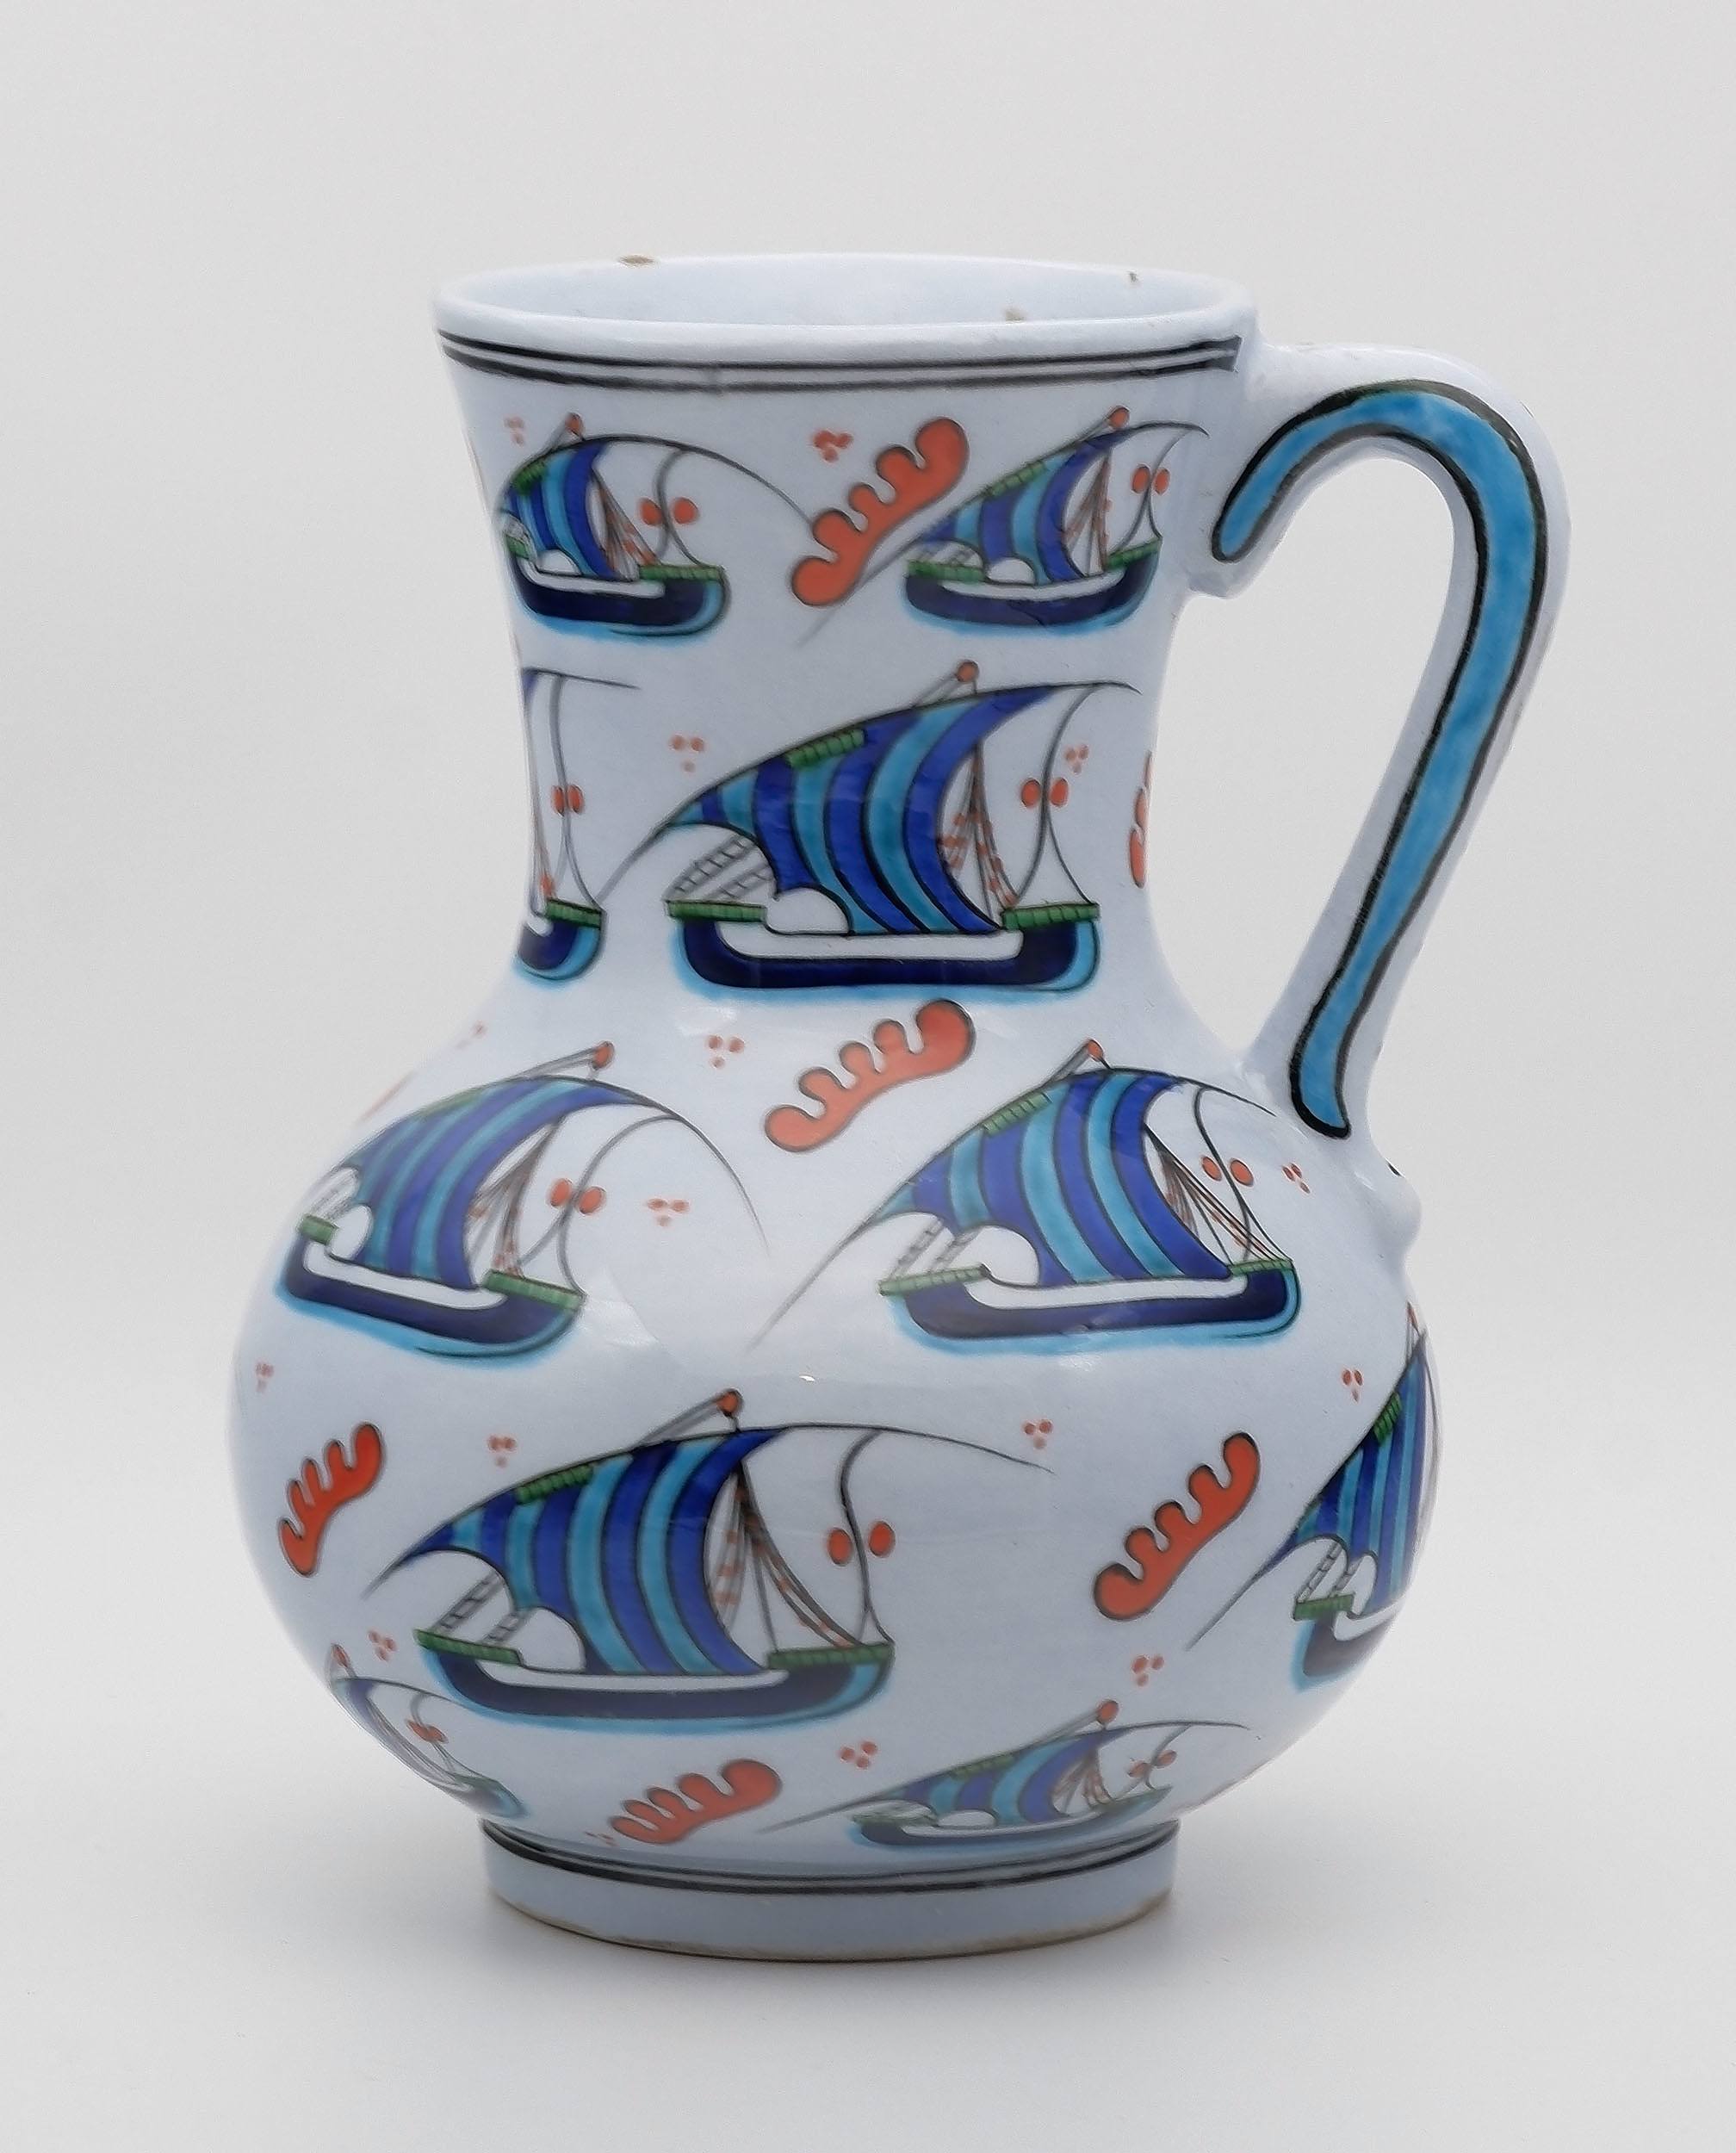 'Good Quality Iznik Style Pottery Ewer from the Gursoy Workshop Turkey, Late 20th Century'